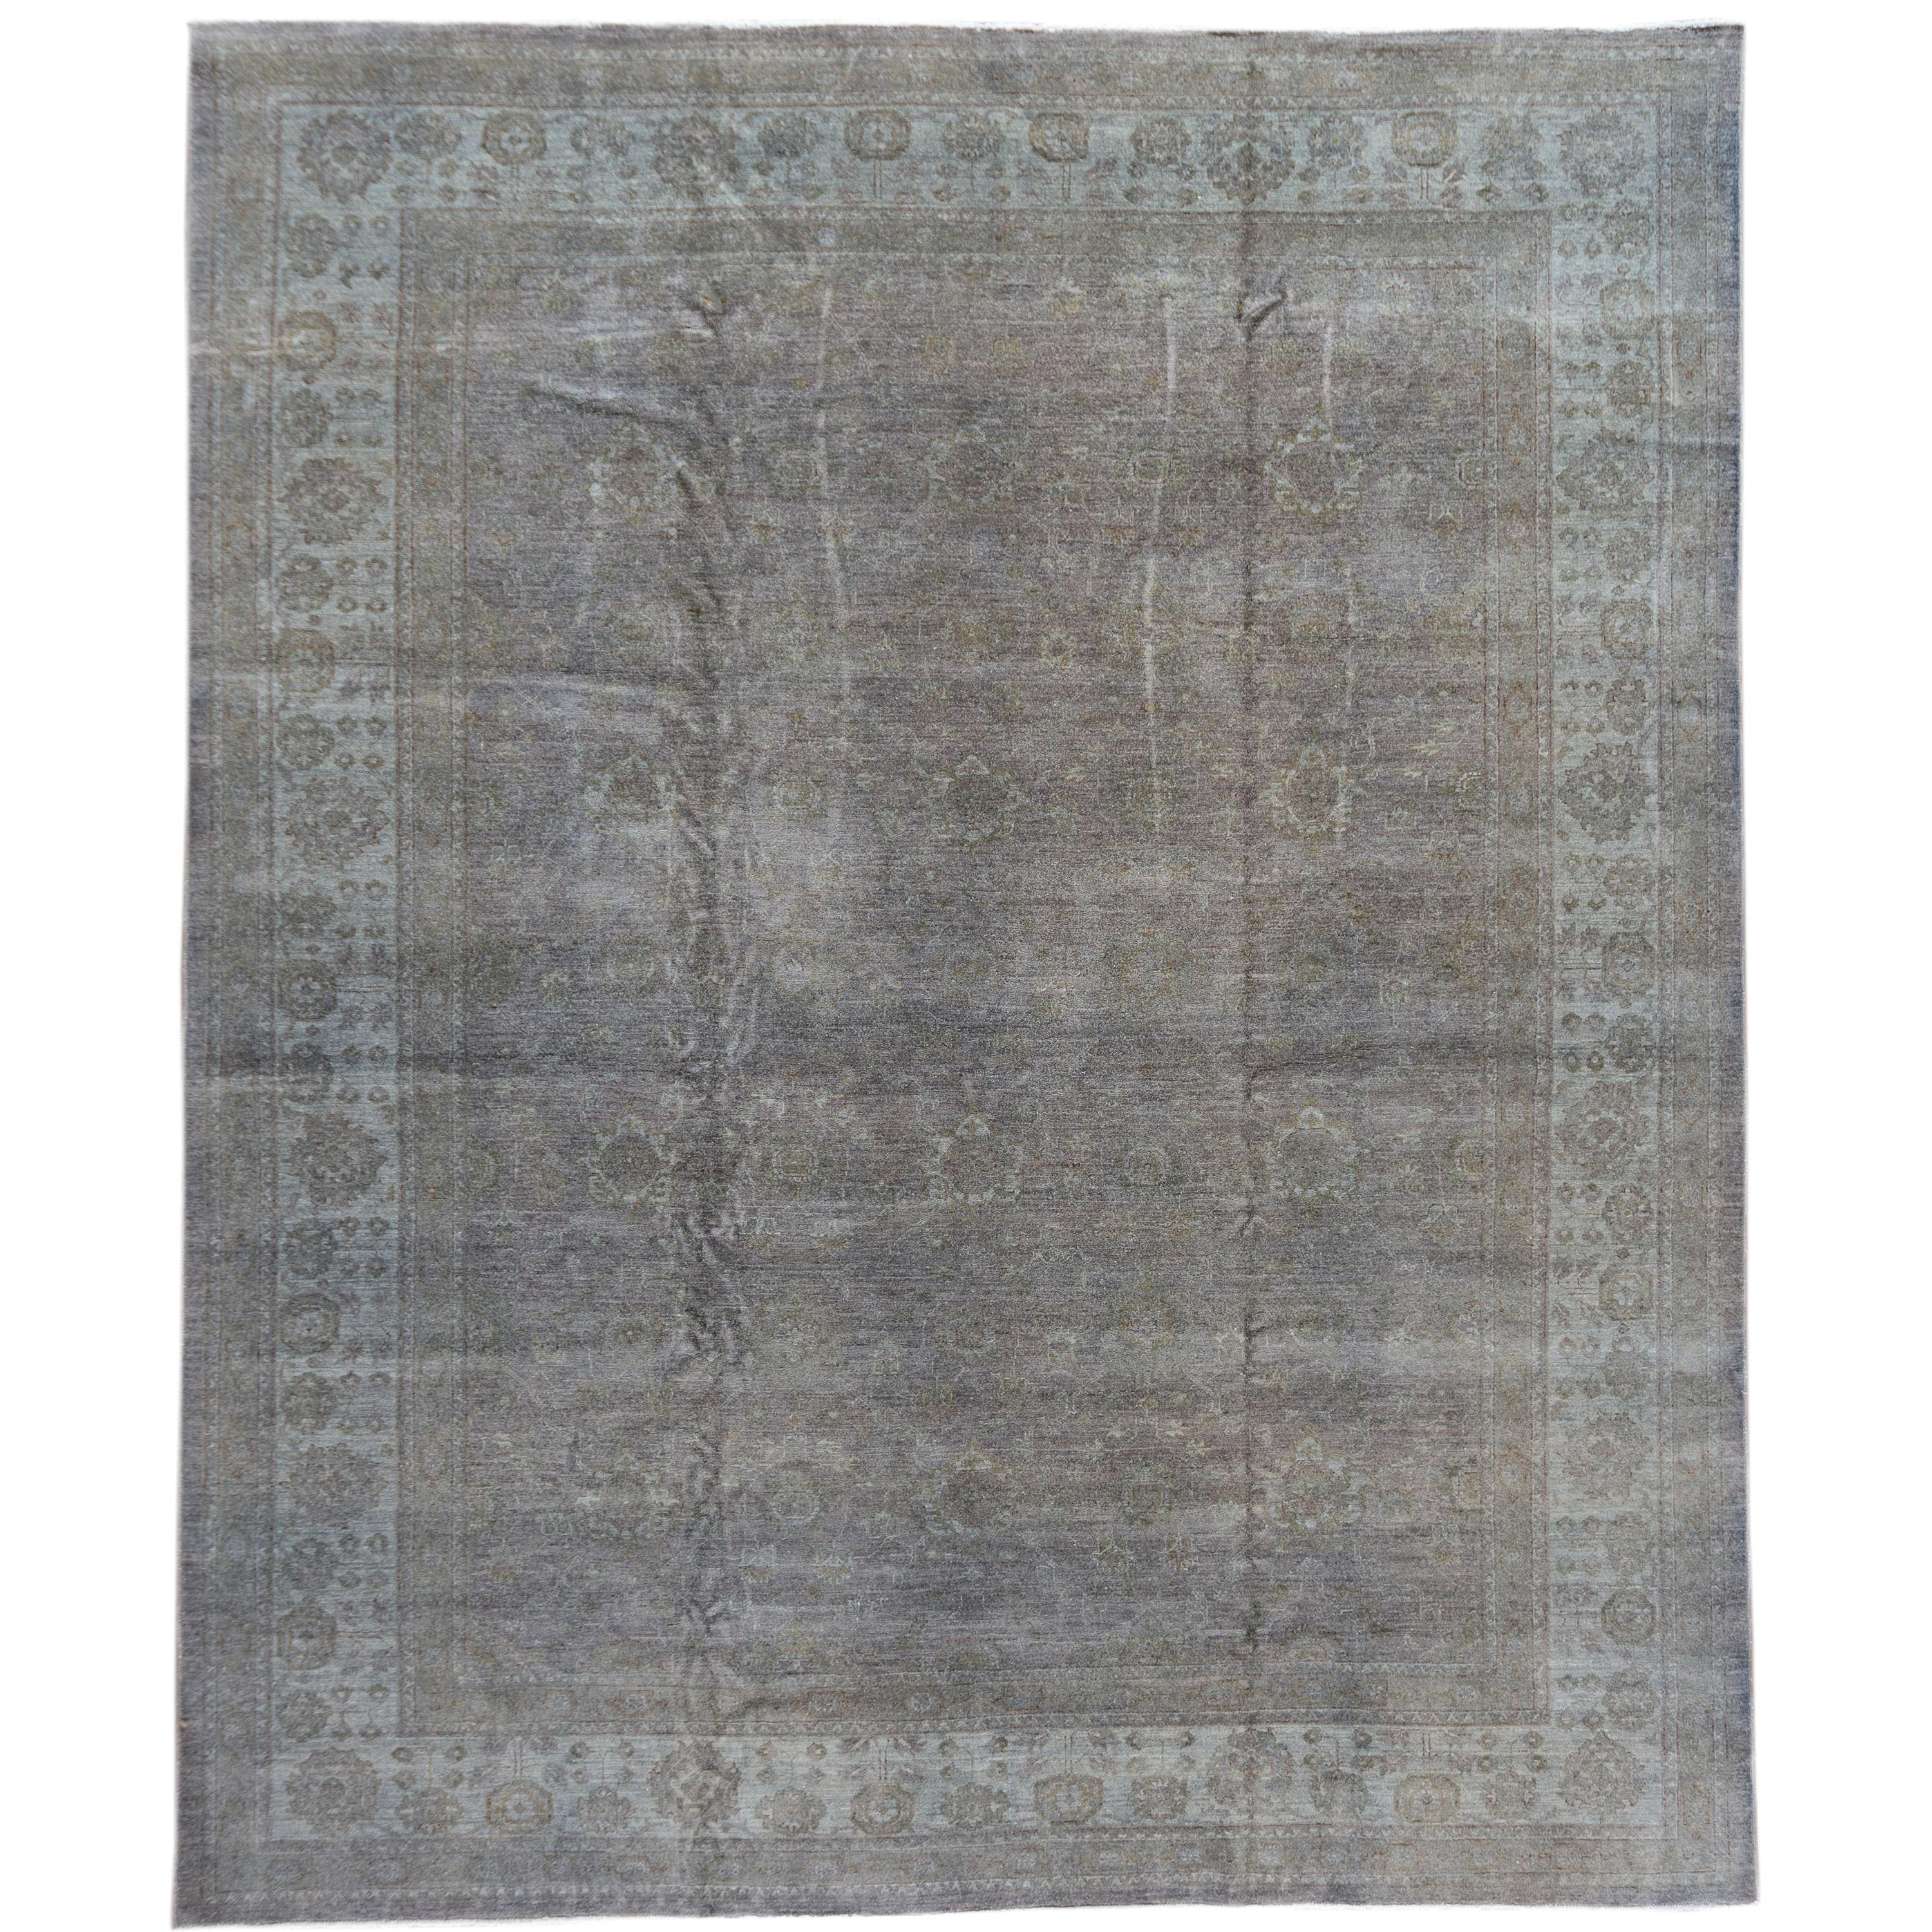 Contemporary gray overdyed wool room-size rug.